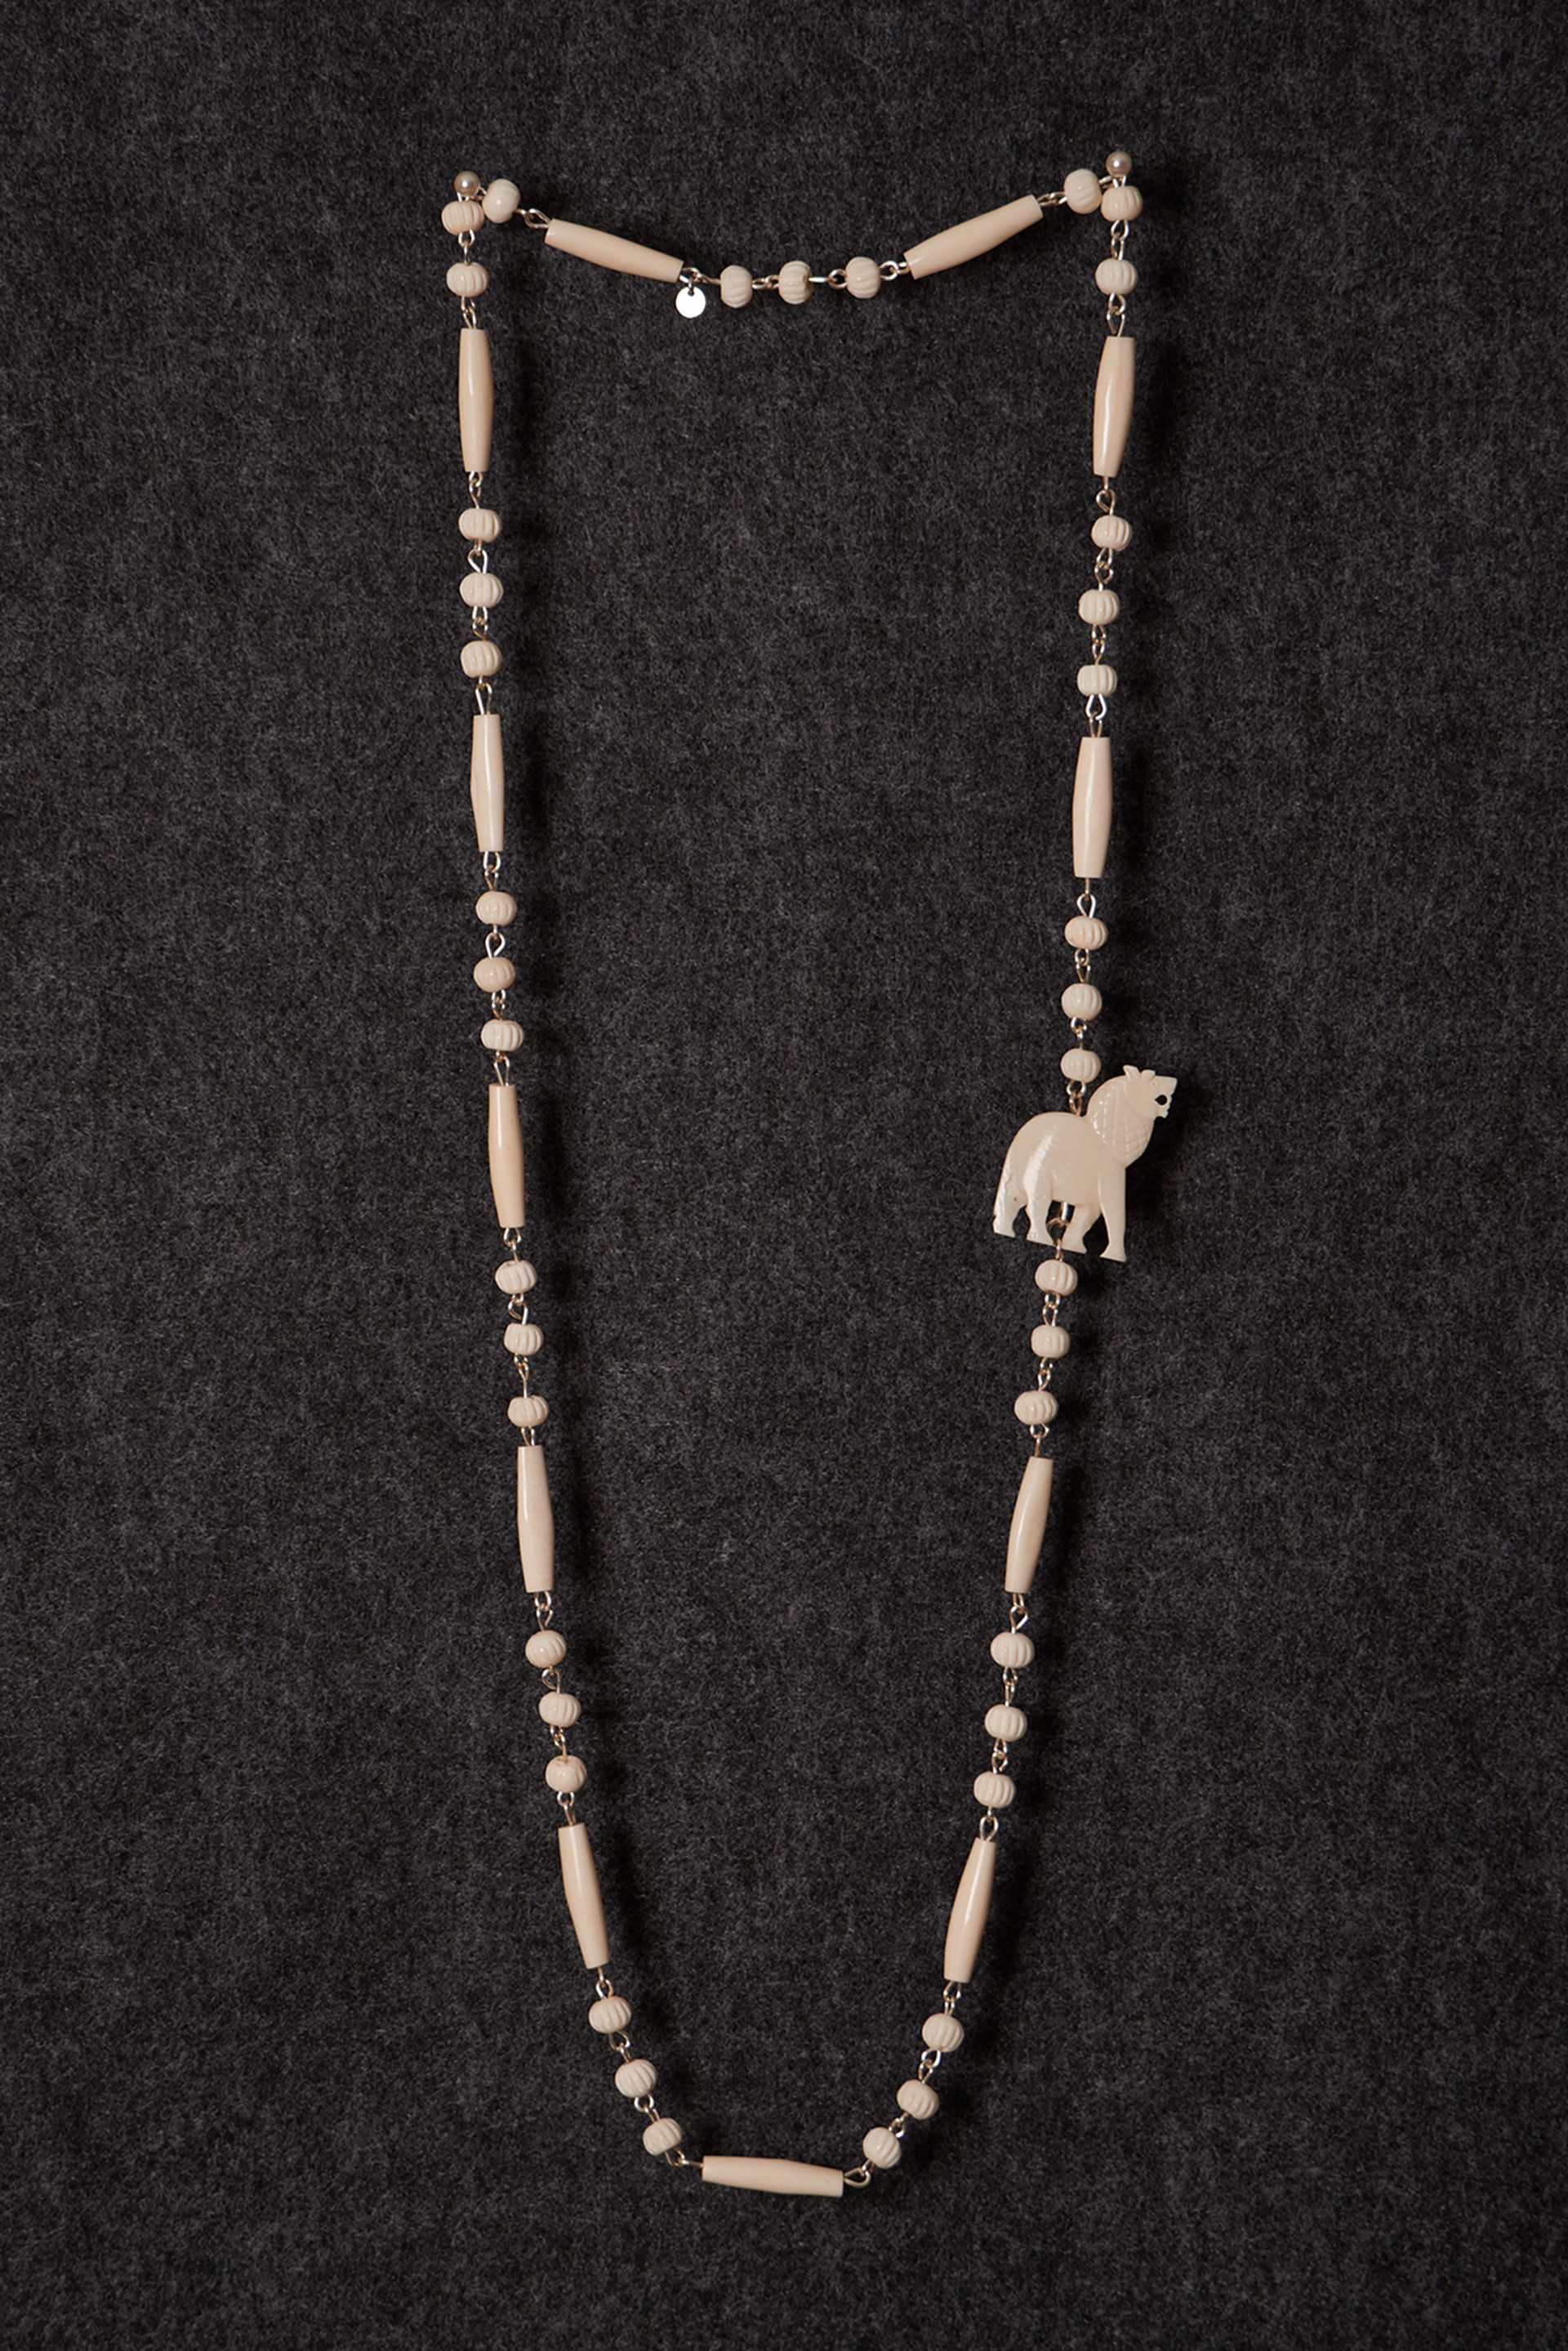 Lionhearted Necklace by Cameron Johnson